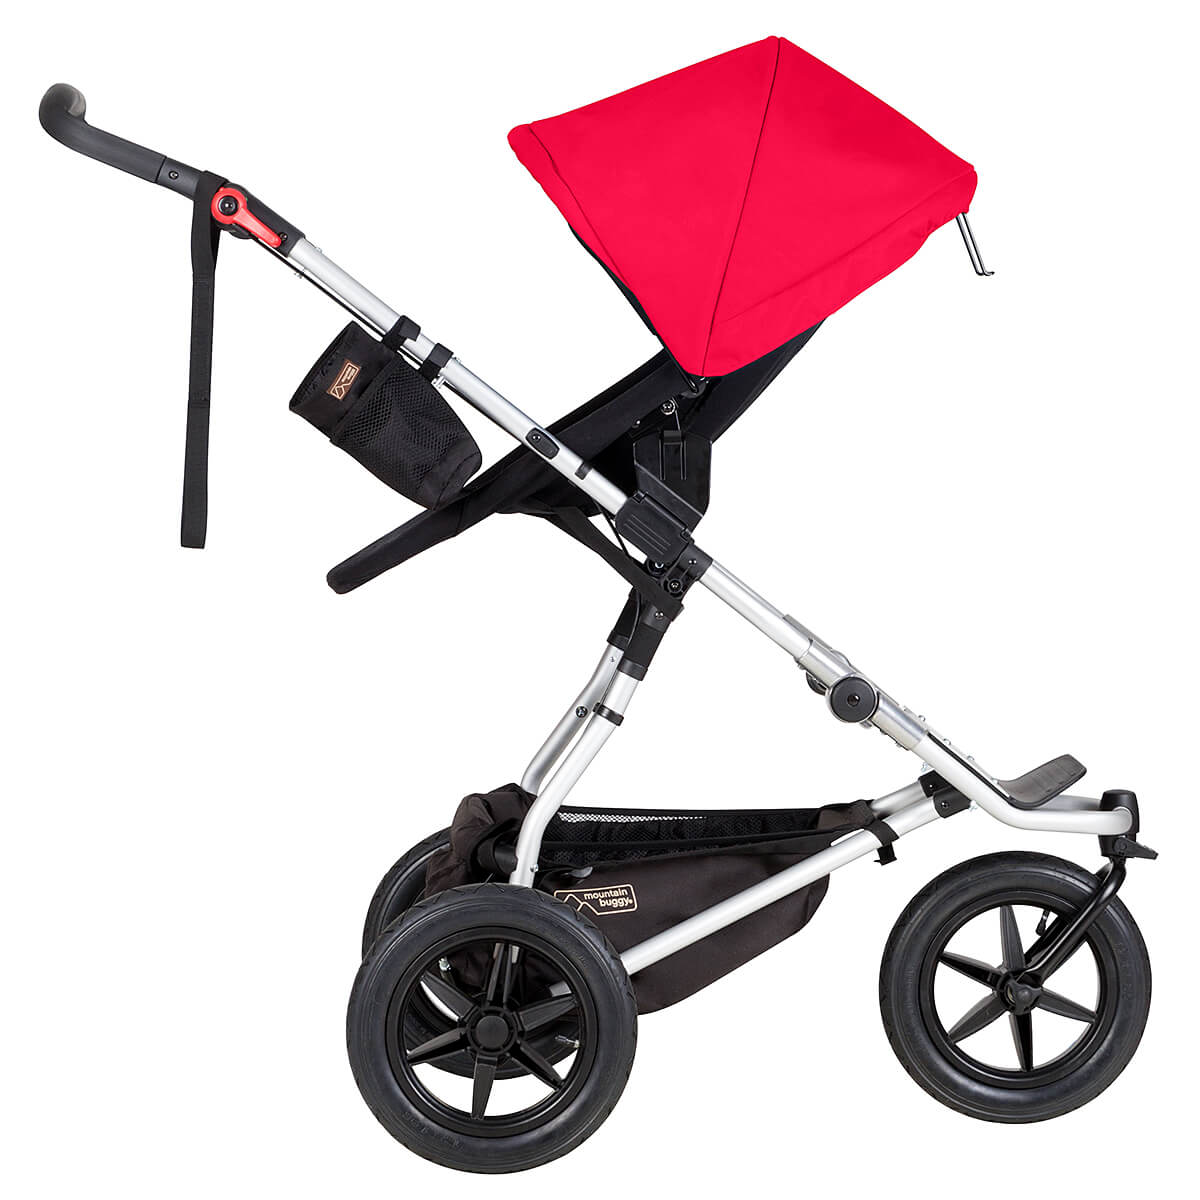 Mountain Buggy urban jungle™ - All Rounder Buggy